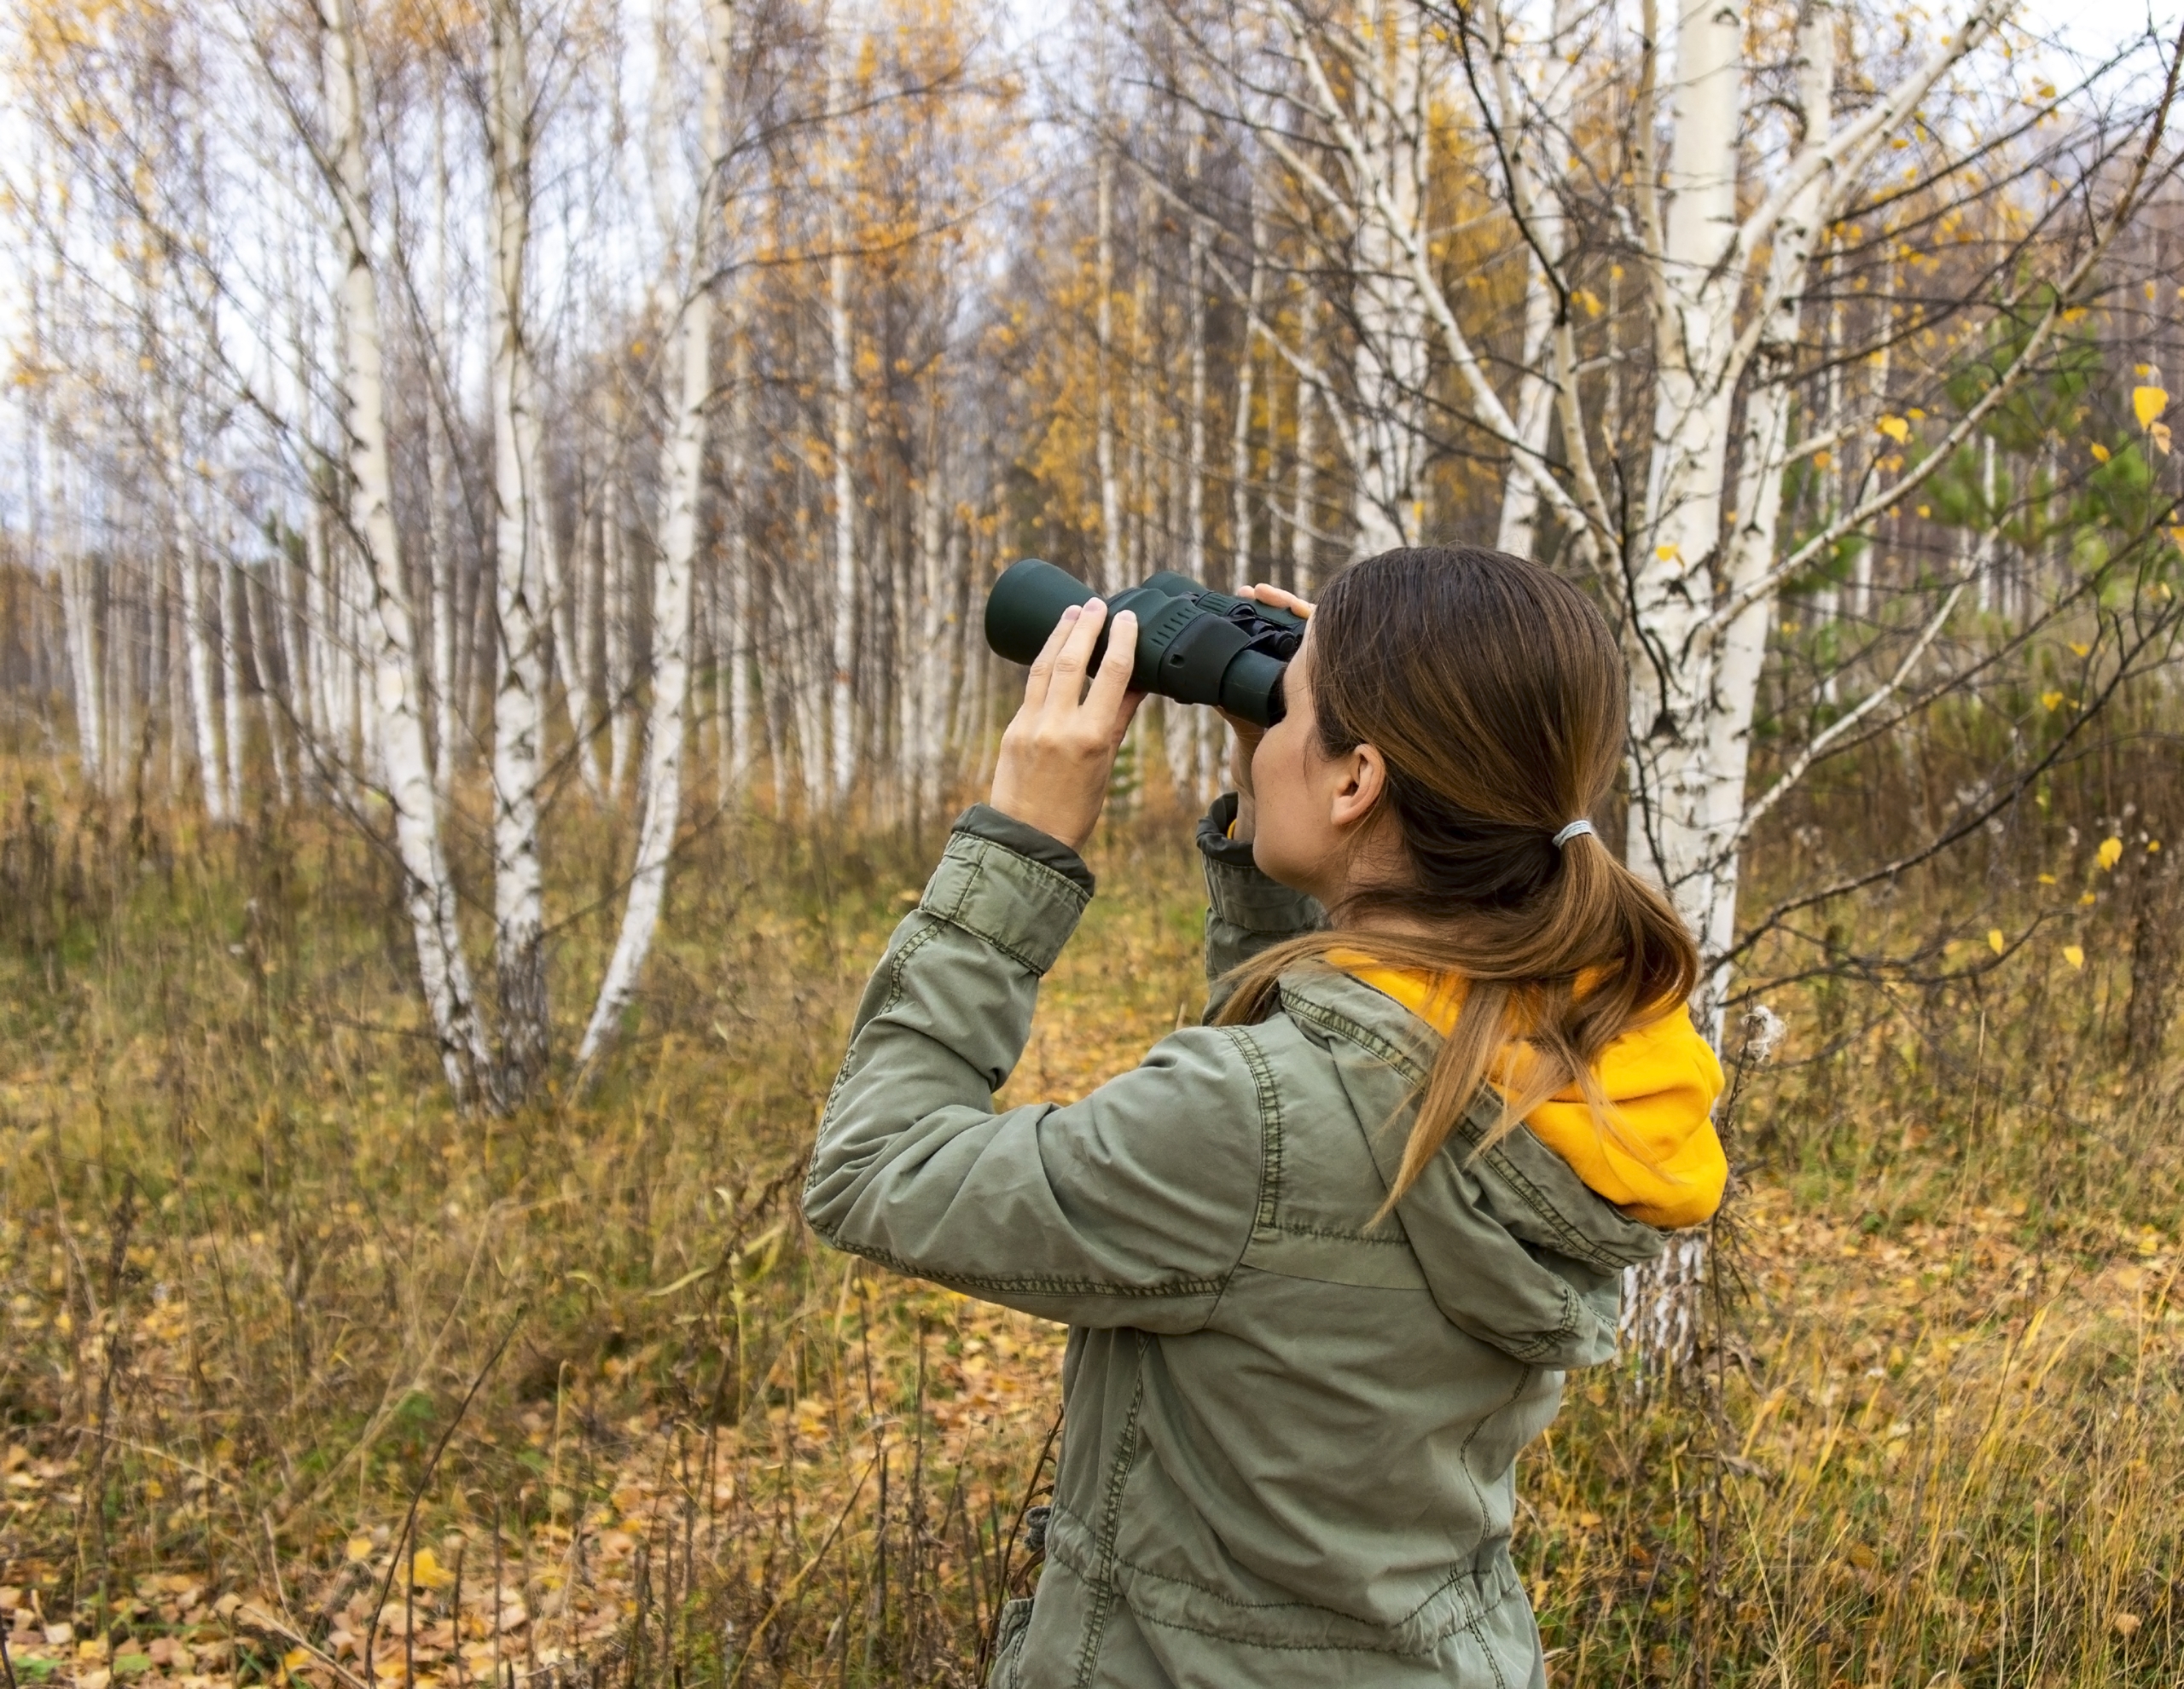 Young woman with binoculars watching birds in the autumn forest Scientific research - Songbird RV Park 3